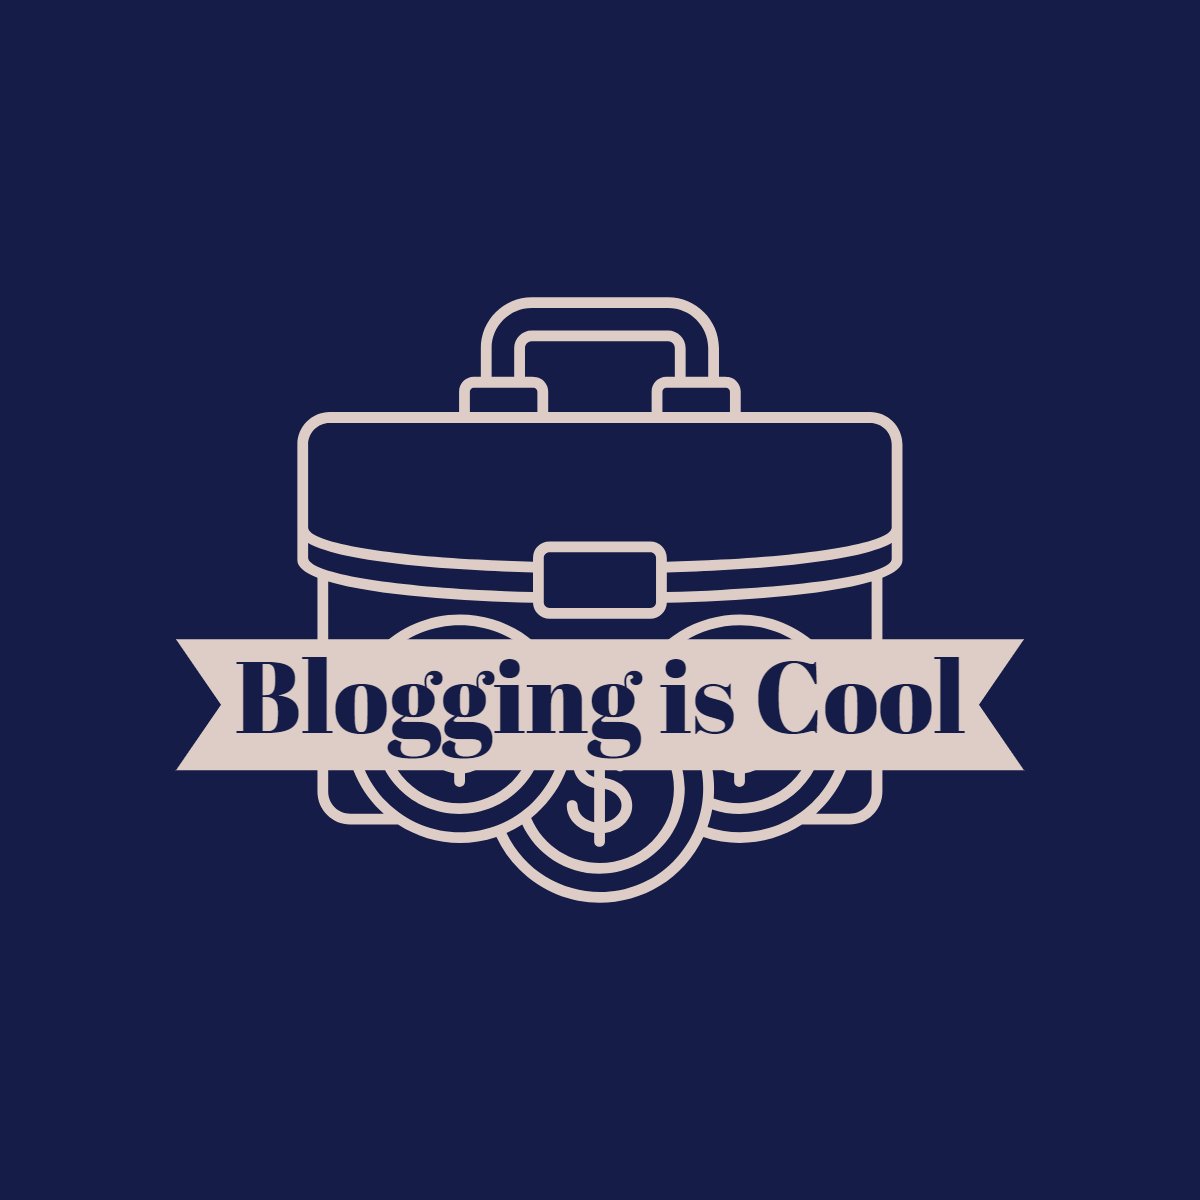 bloggingiscool.com about making quality content consistently for your blog